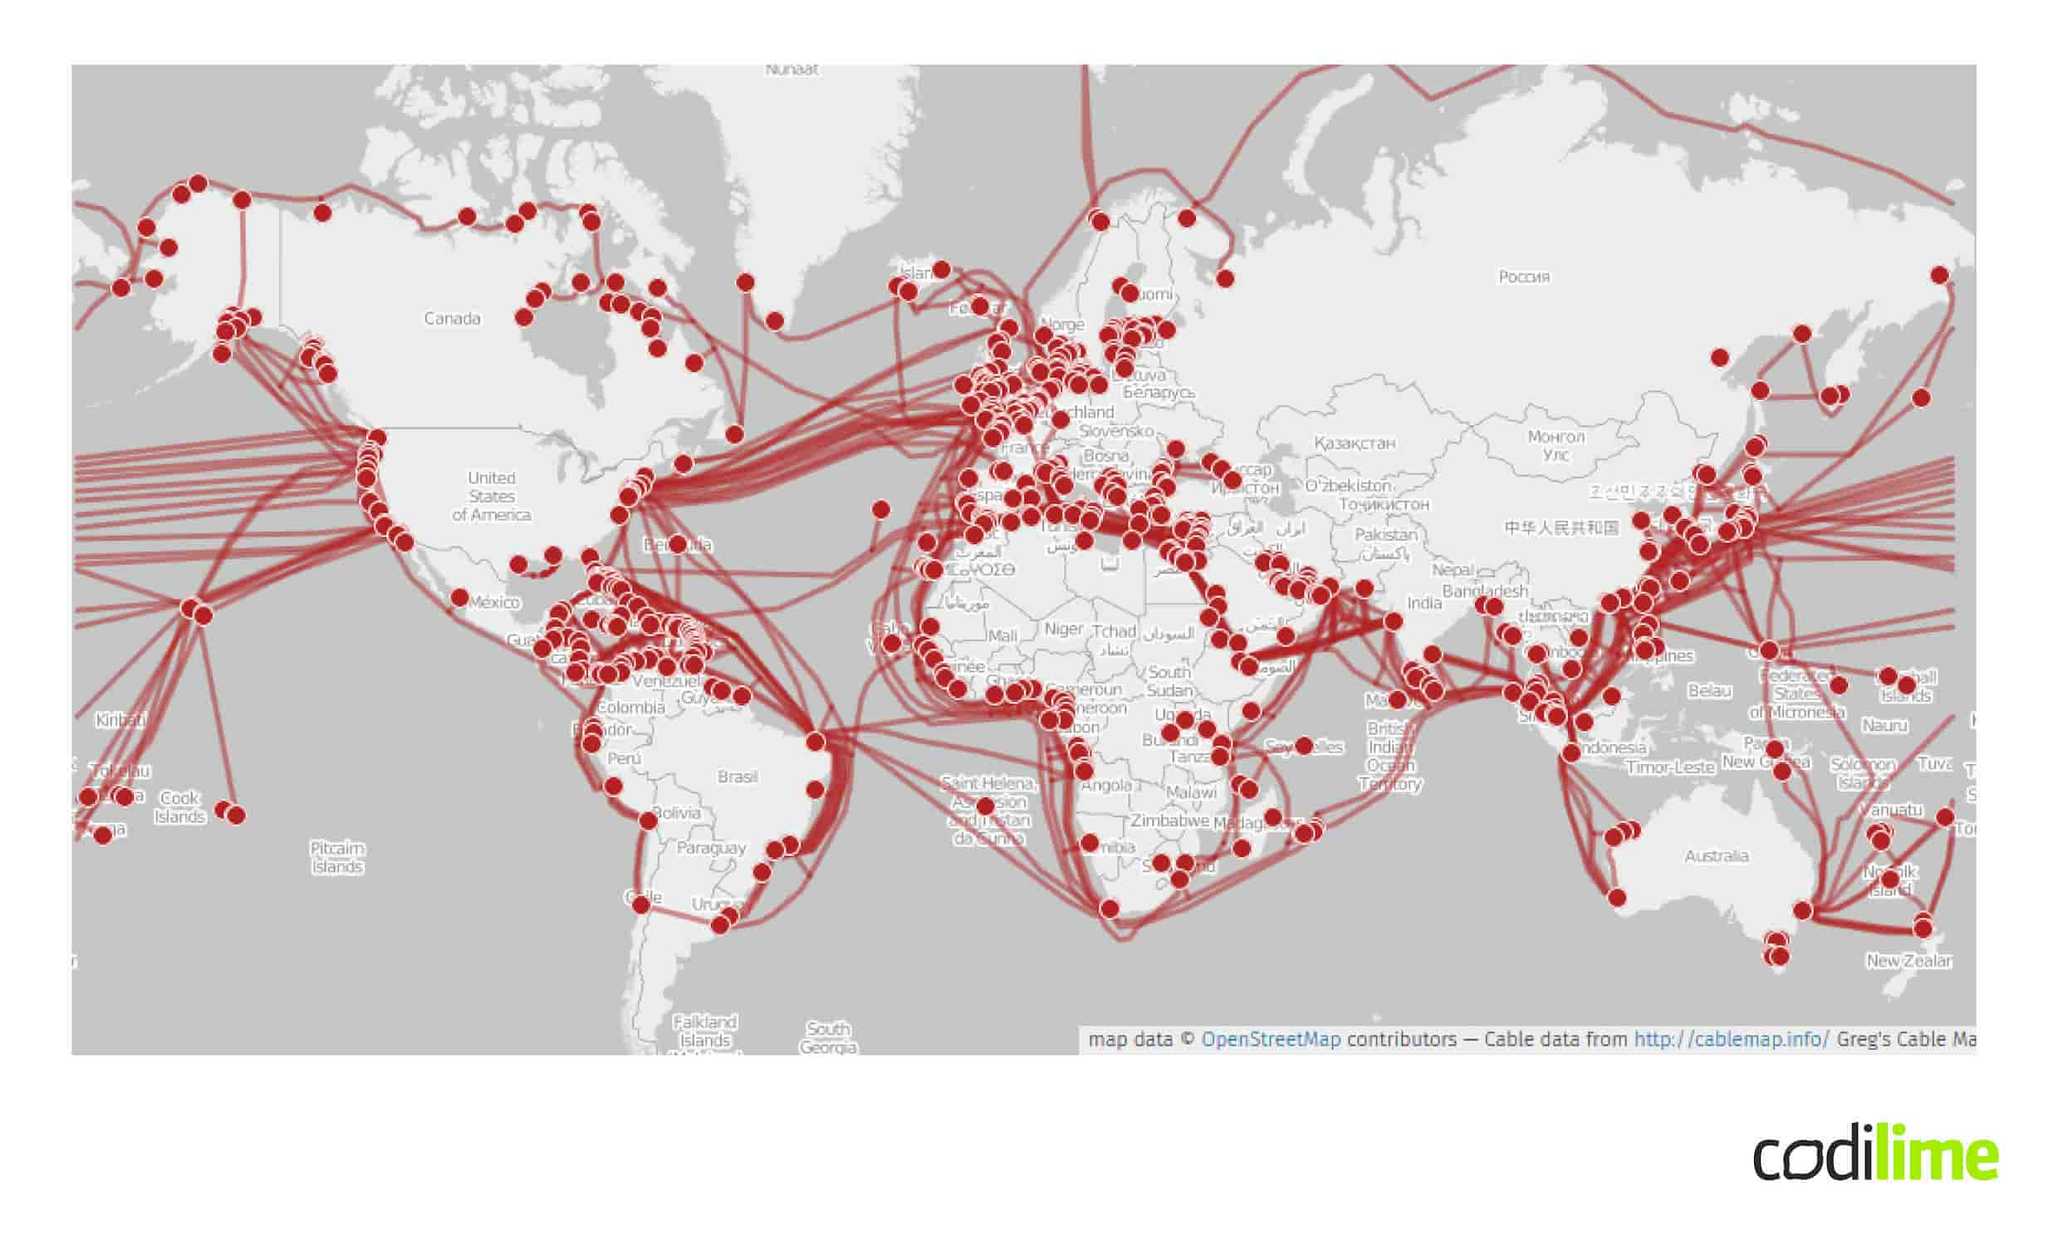  Routing of prominent undersea cables